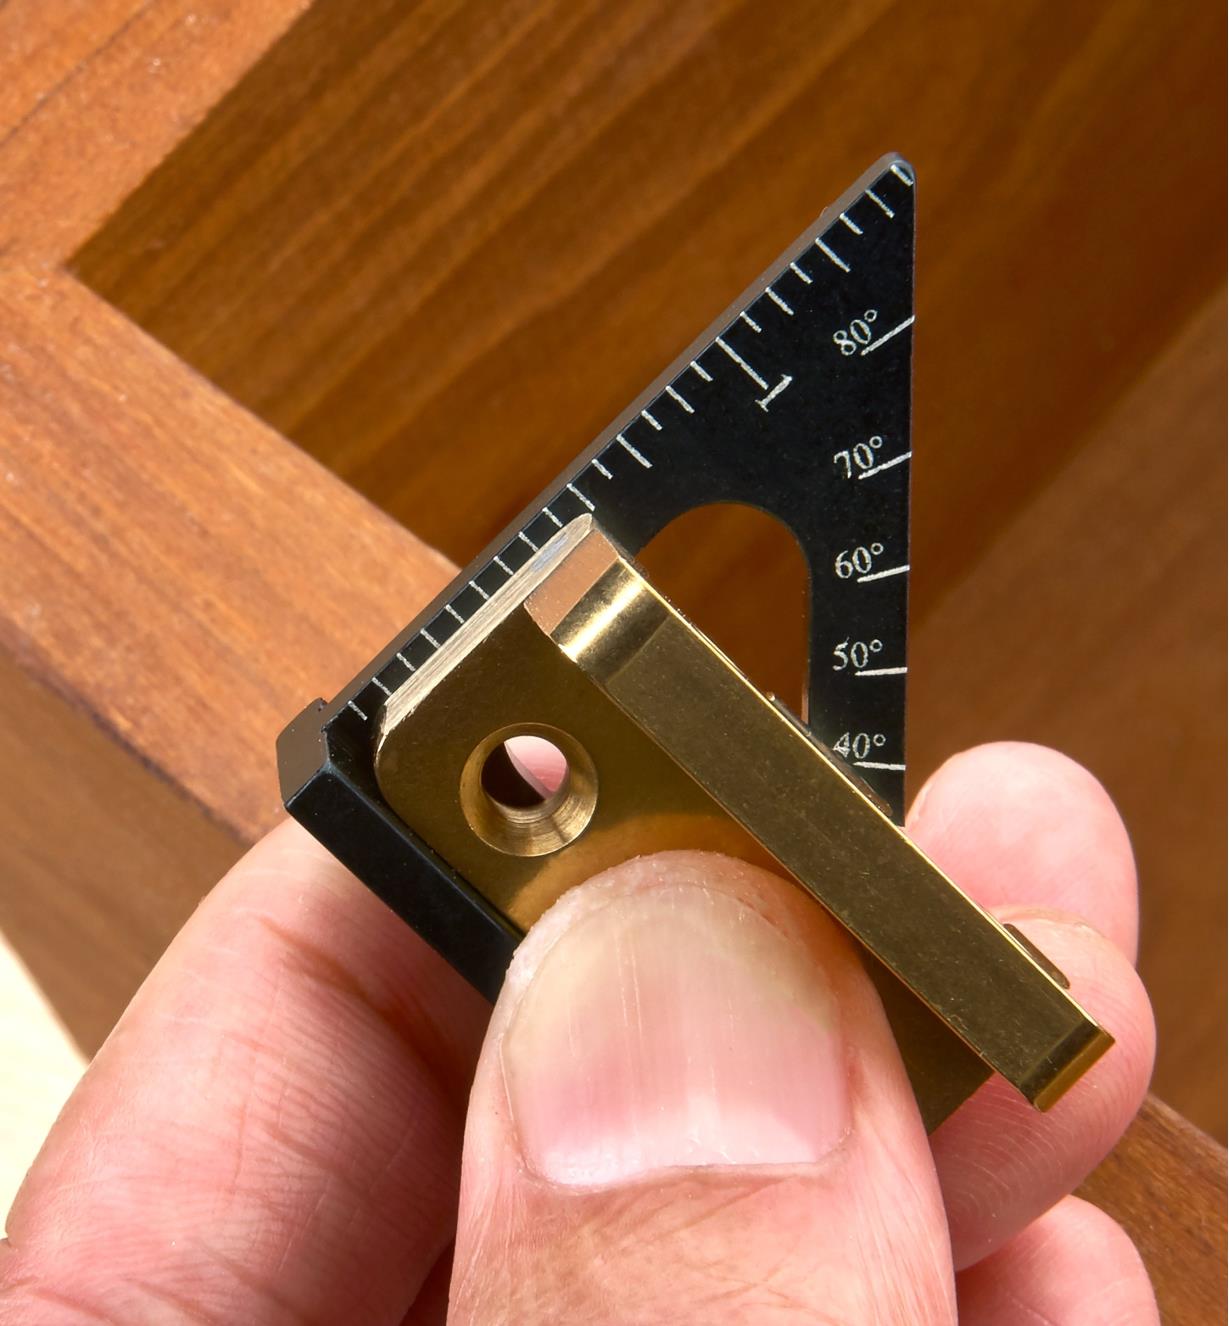 Using a Veritas 1 1/2"" Pocket Layout Square to measure a small hinge leaf